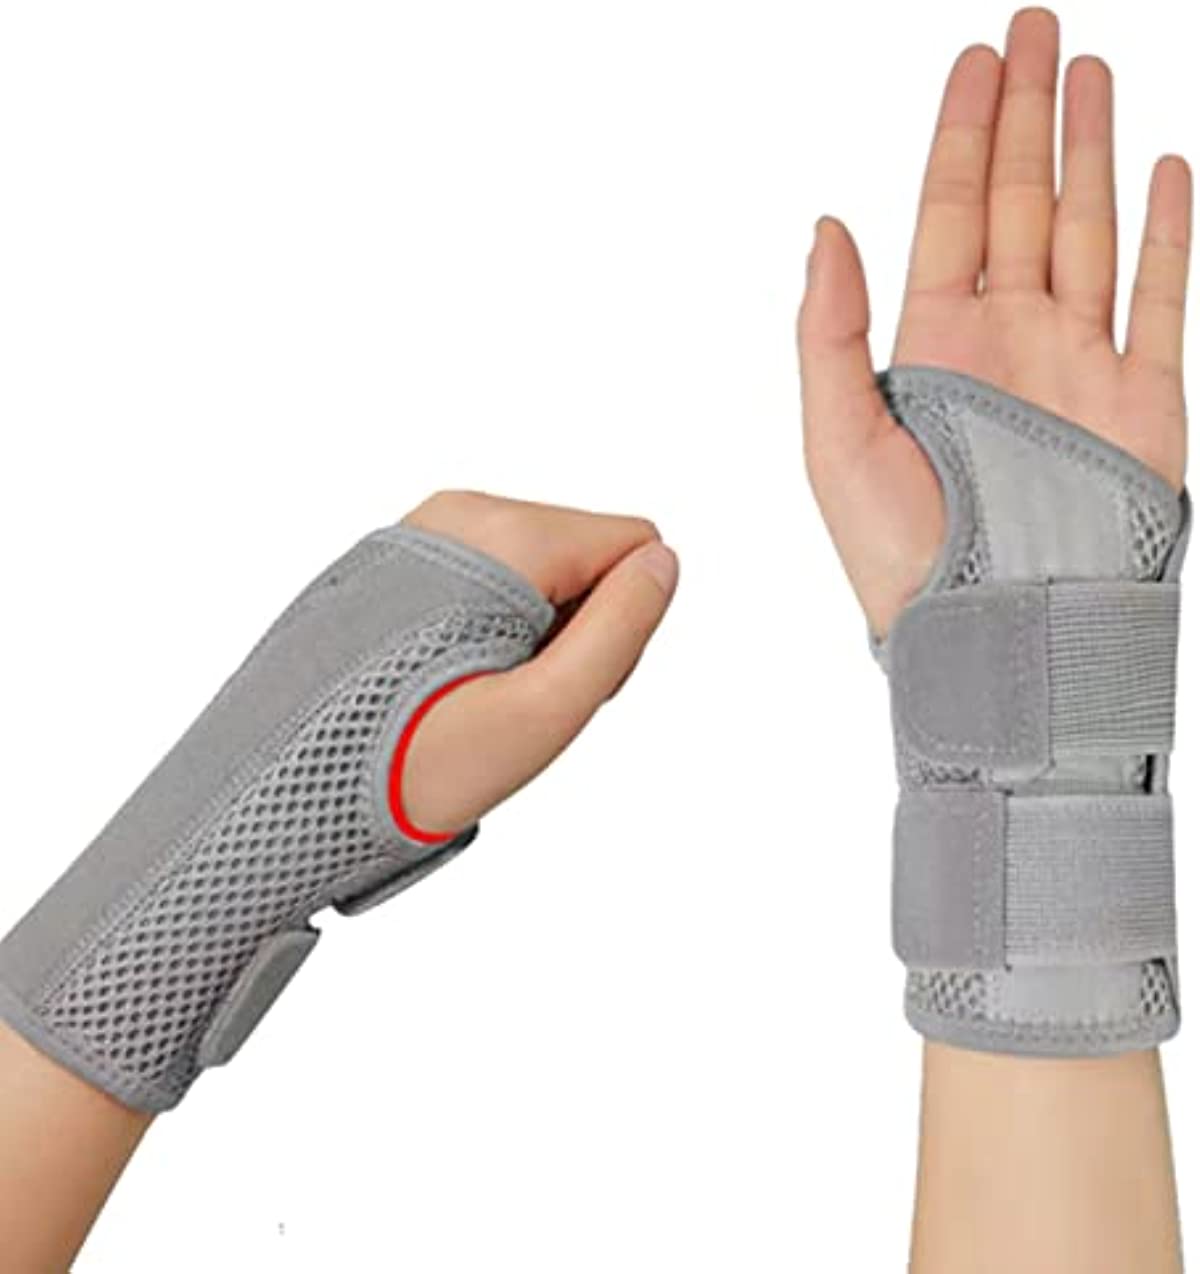 Wrist Brace for Carpal Tunnel Relief Night Support , Hand Brace with 2 Stays for Women Men , Adjustable Wrist Support Splint for Right Left Hands for Tendonitis, Arthritis , Sprains (Small/Medium (Pack of 1), Left Hand-Gray)